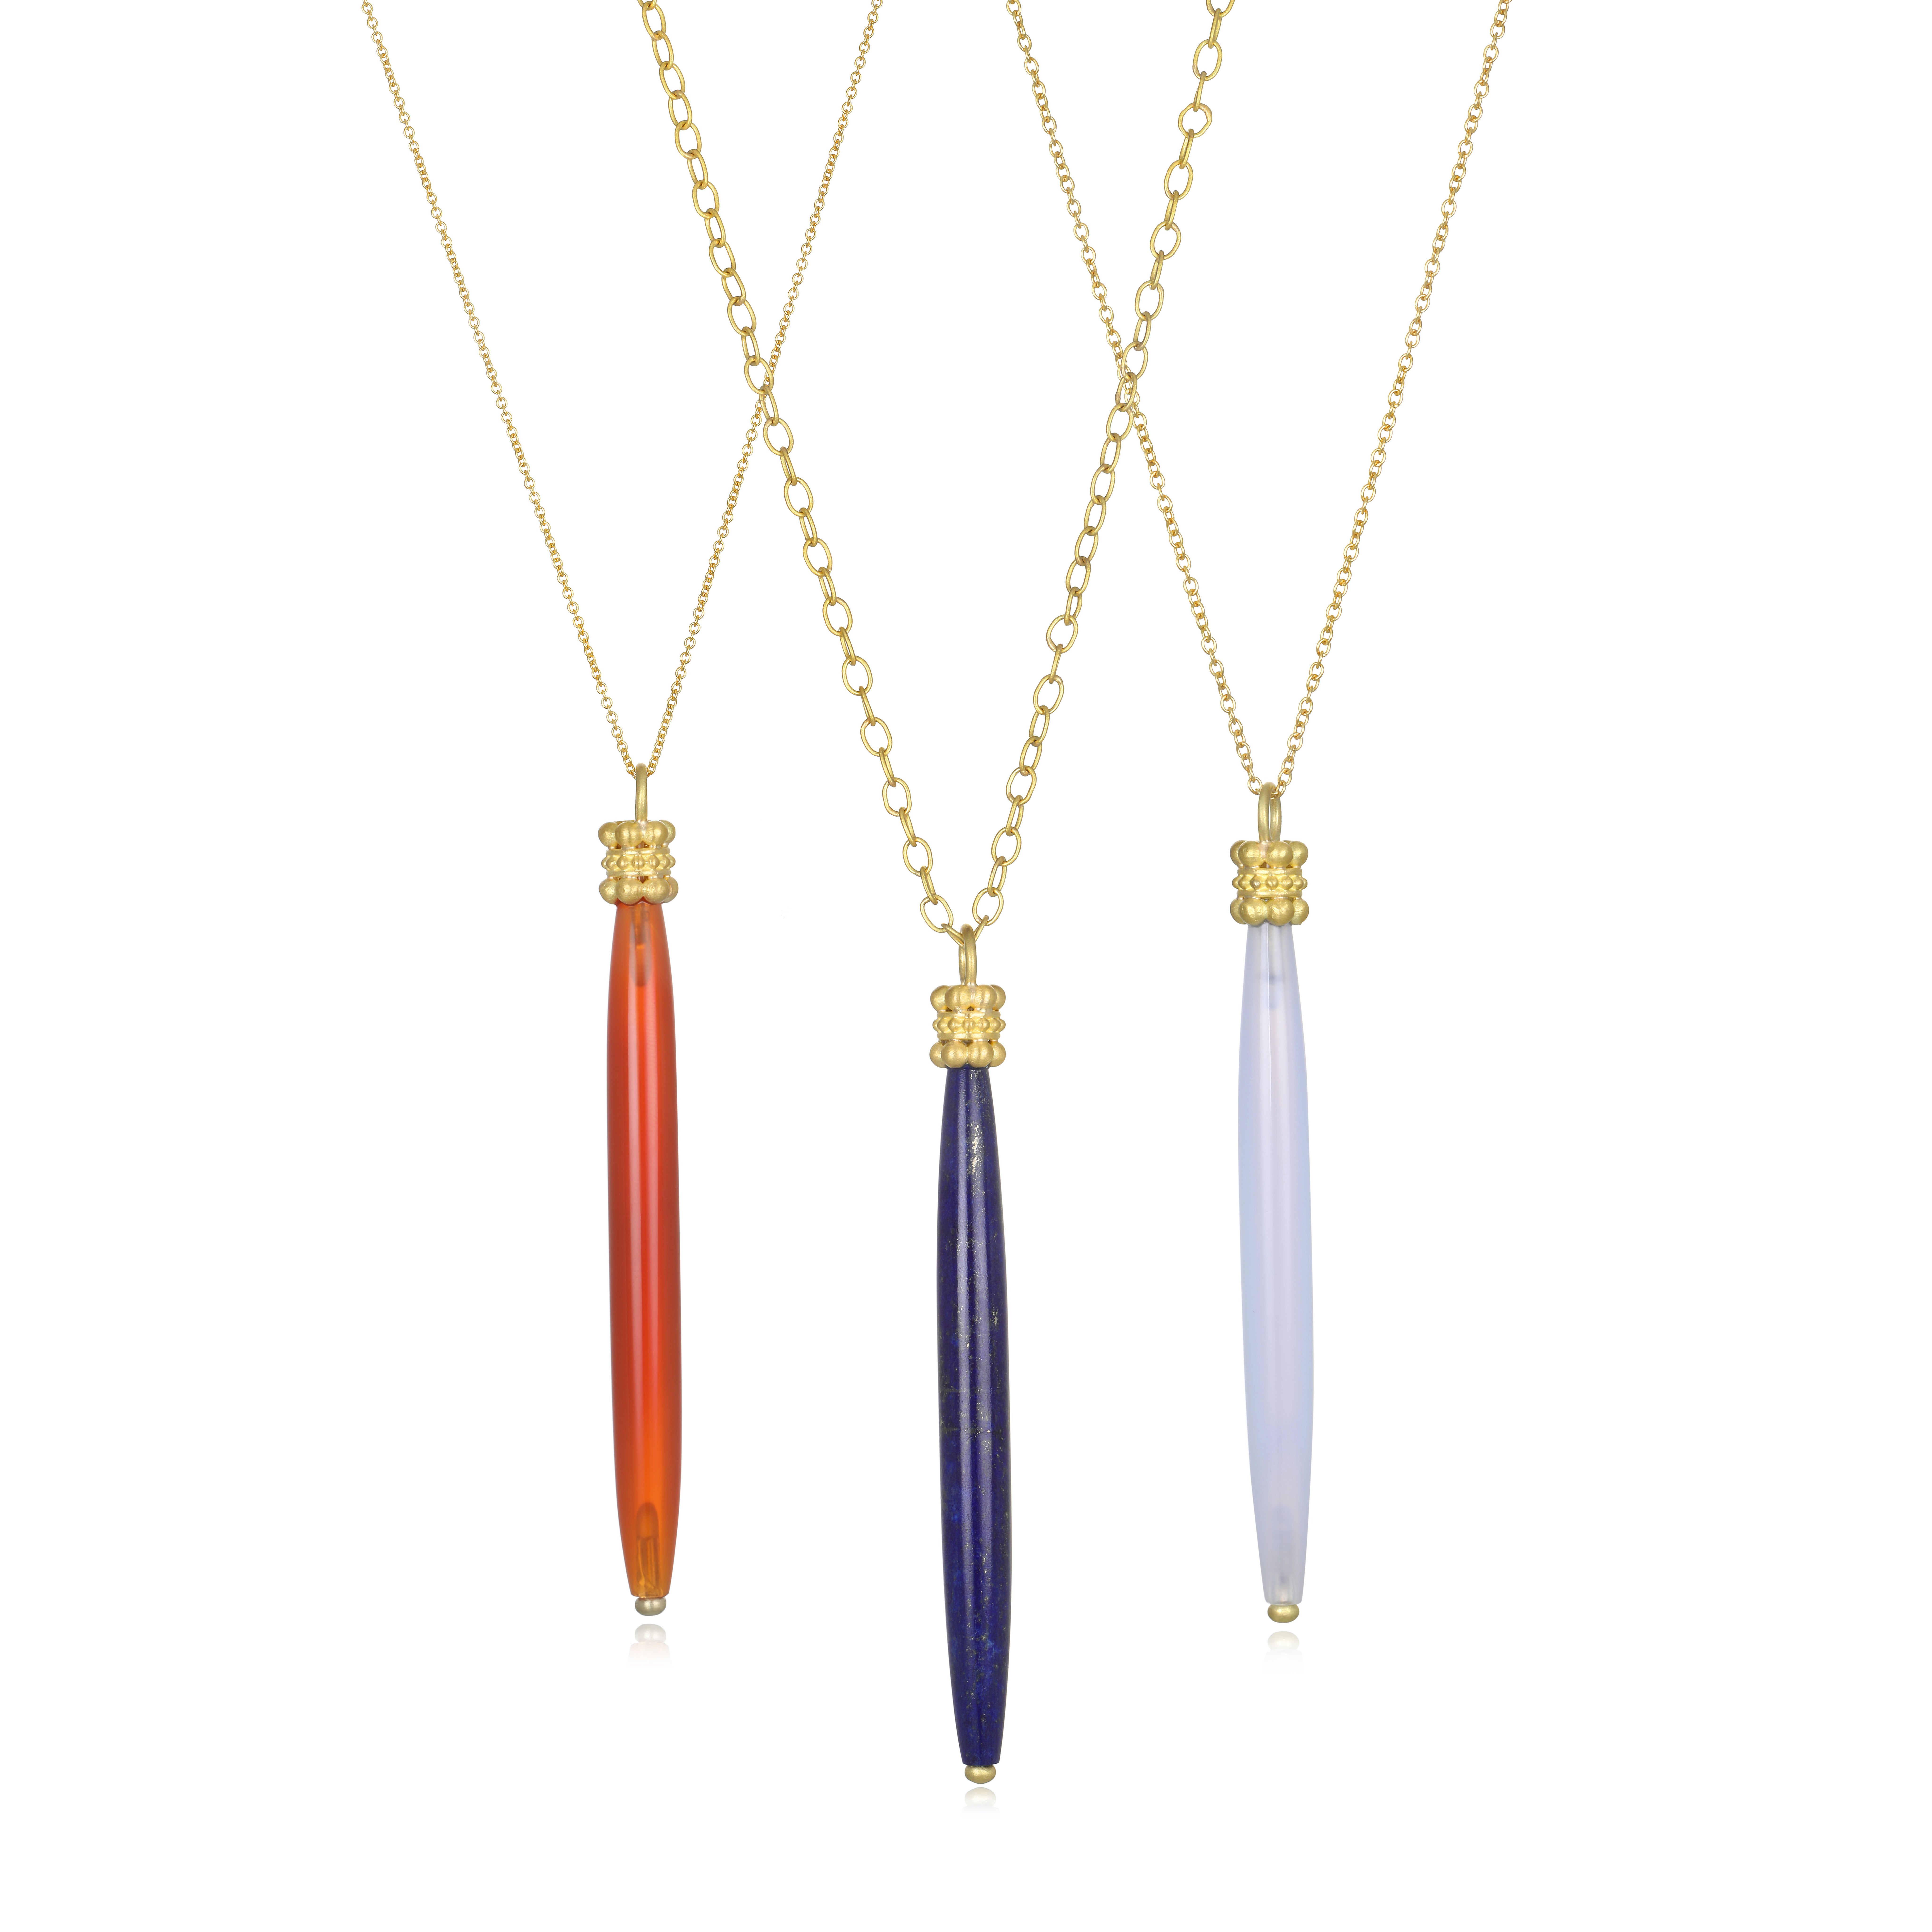 18K Gold Lapis Lazuli Tapered Bar pendant with rondel cap is 3